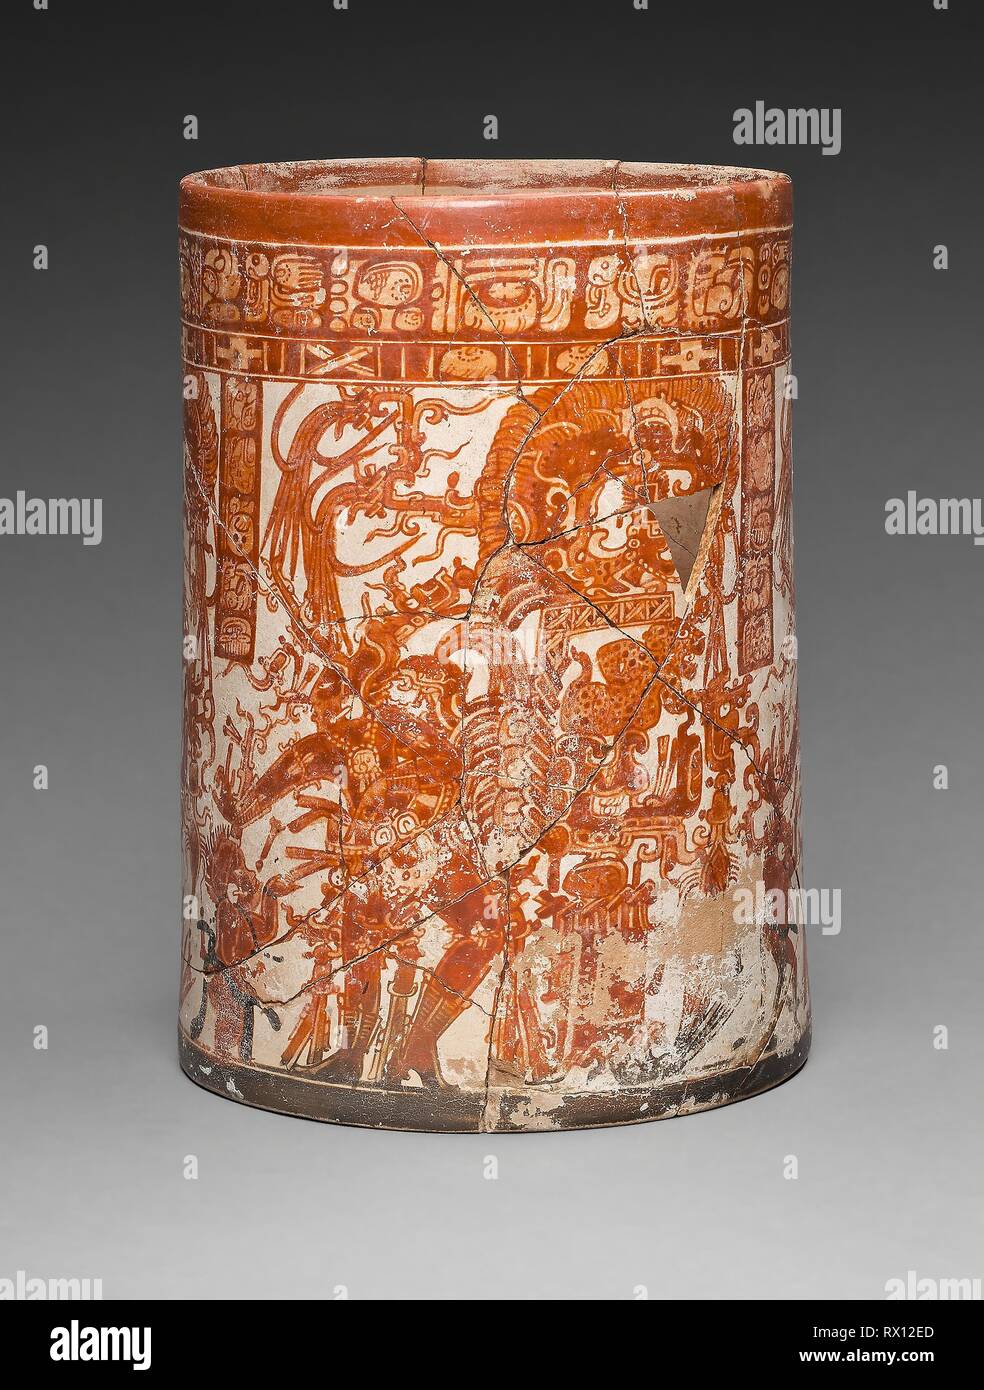 Vessel of the Dancing Lords. Ah Maxam (active mid-/late 8th century); Late Classic Maya; Vicinity of Naranjo, Petén region, Guatemala. Date: 700 AD-850 AD. Dimensions: 24 × 15.8 cm (9 1/2 × 6 1/4 in.). Ceramic and pigment. Origin: . Museum: The Chicago Art Institute. Stock Photo